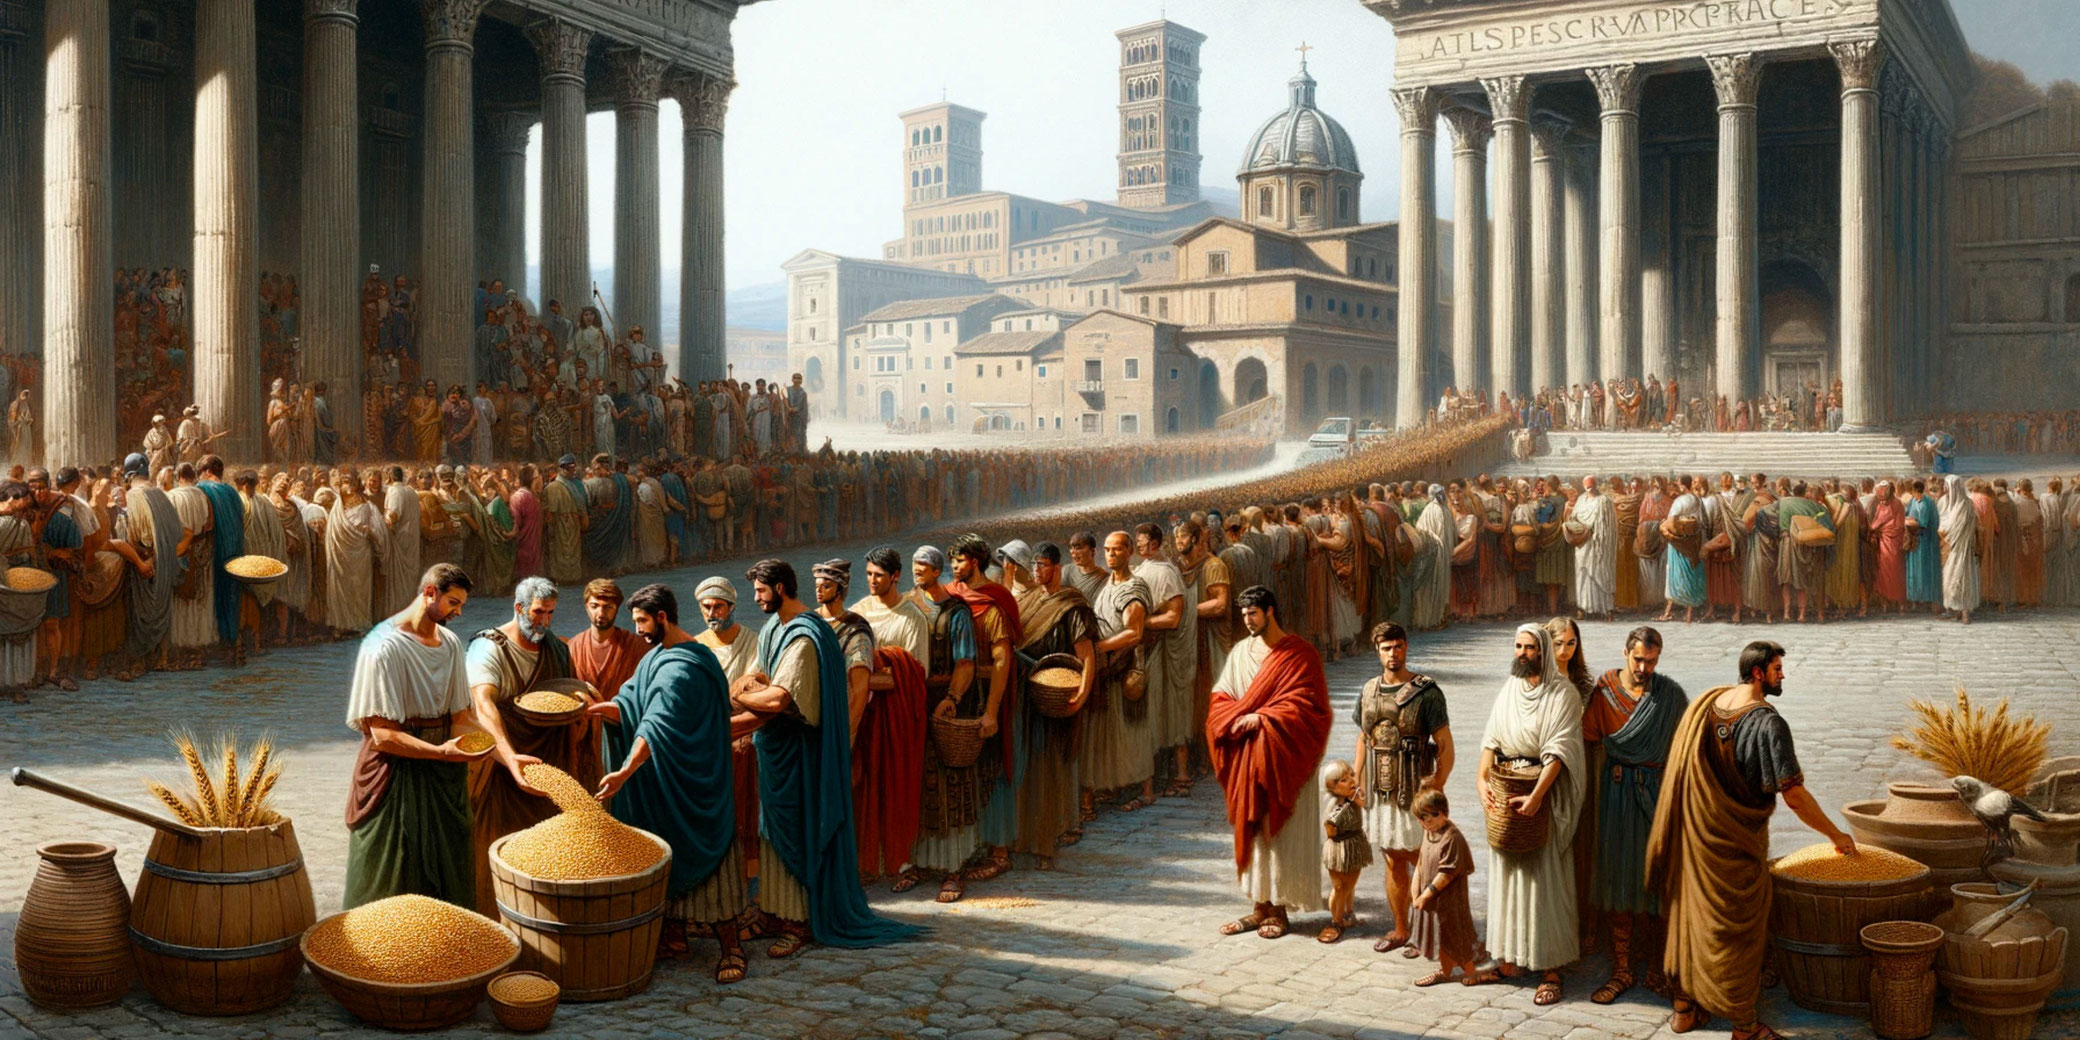 The Grain Dole: How Ancient Rome's vital public welfare system was weaponized by politicians